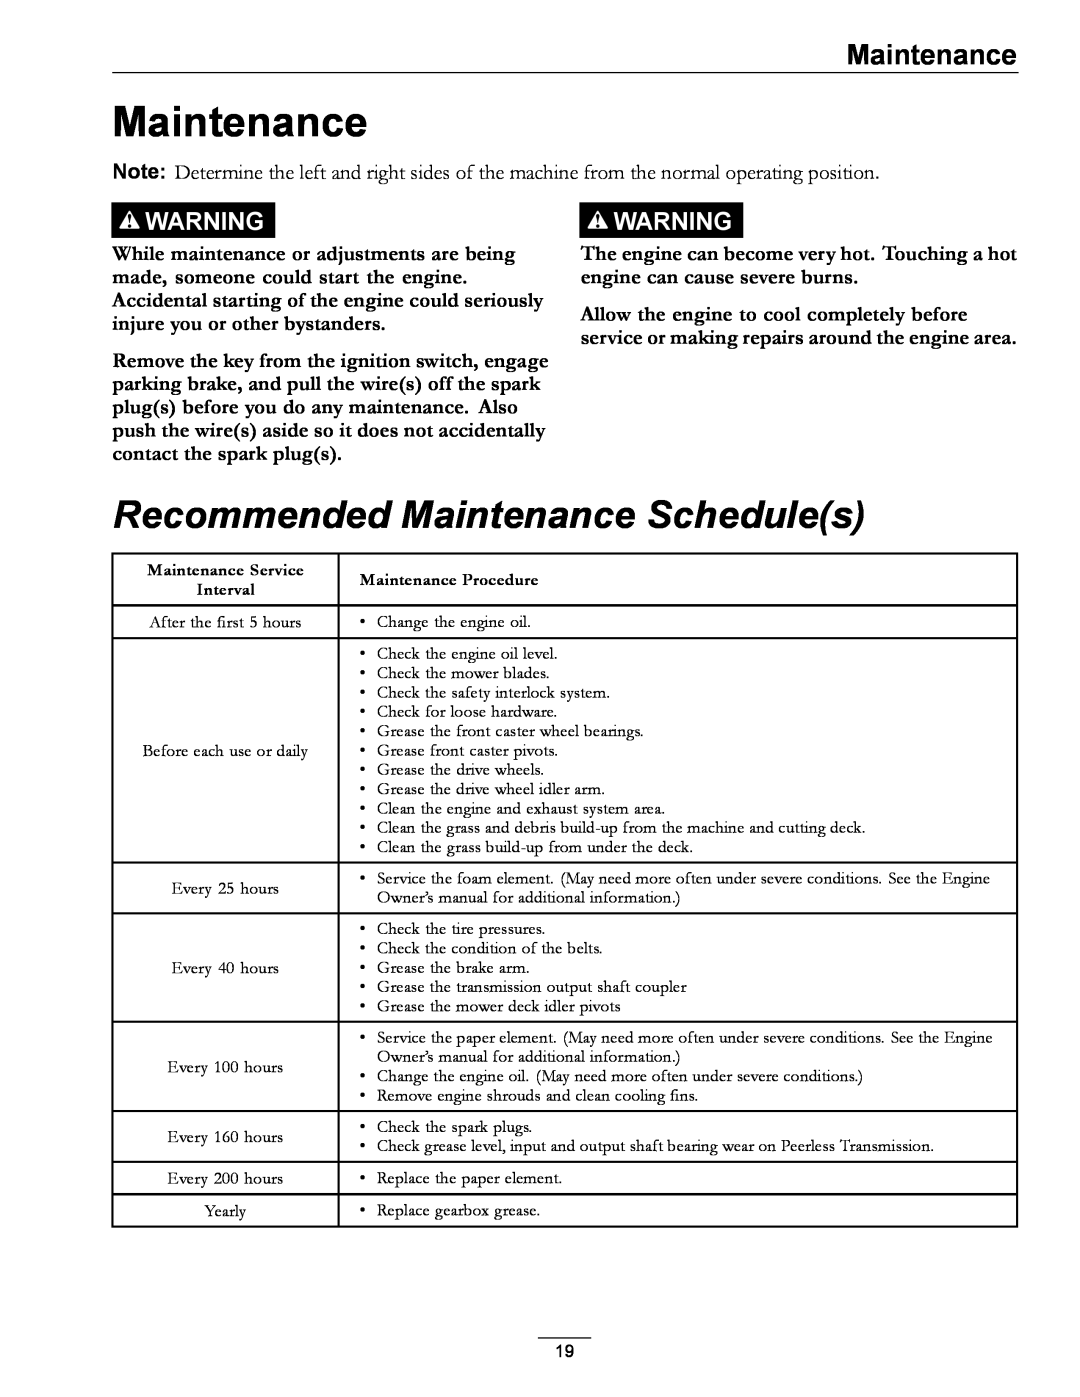 Exmark 00 & Higher, 850 manual Recommended Maintenance Schedules 